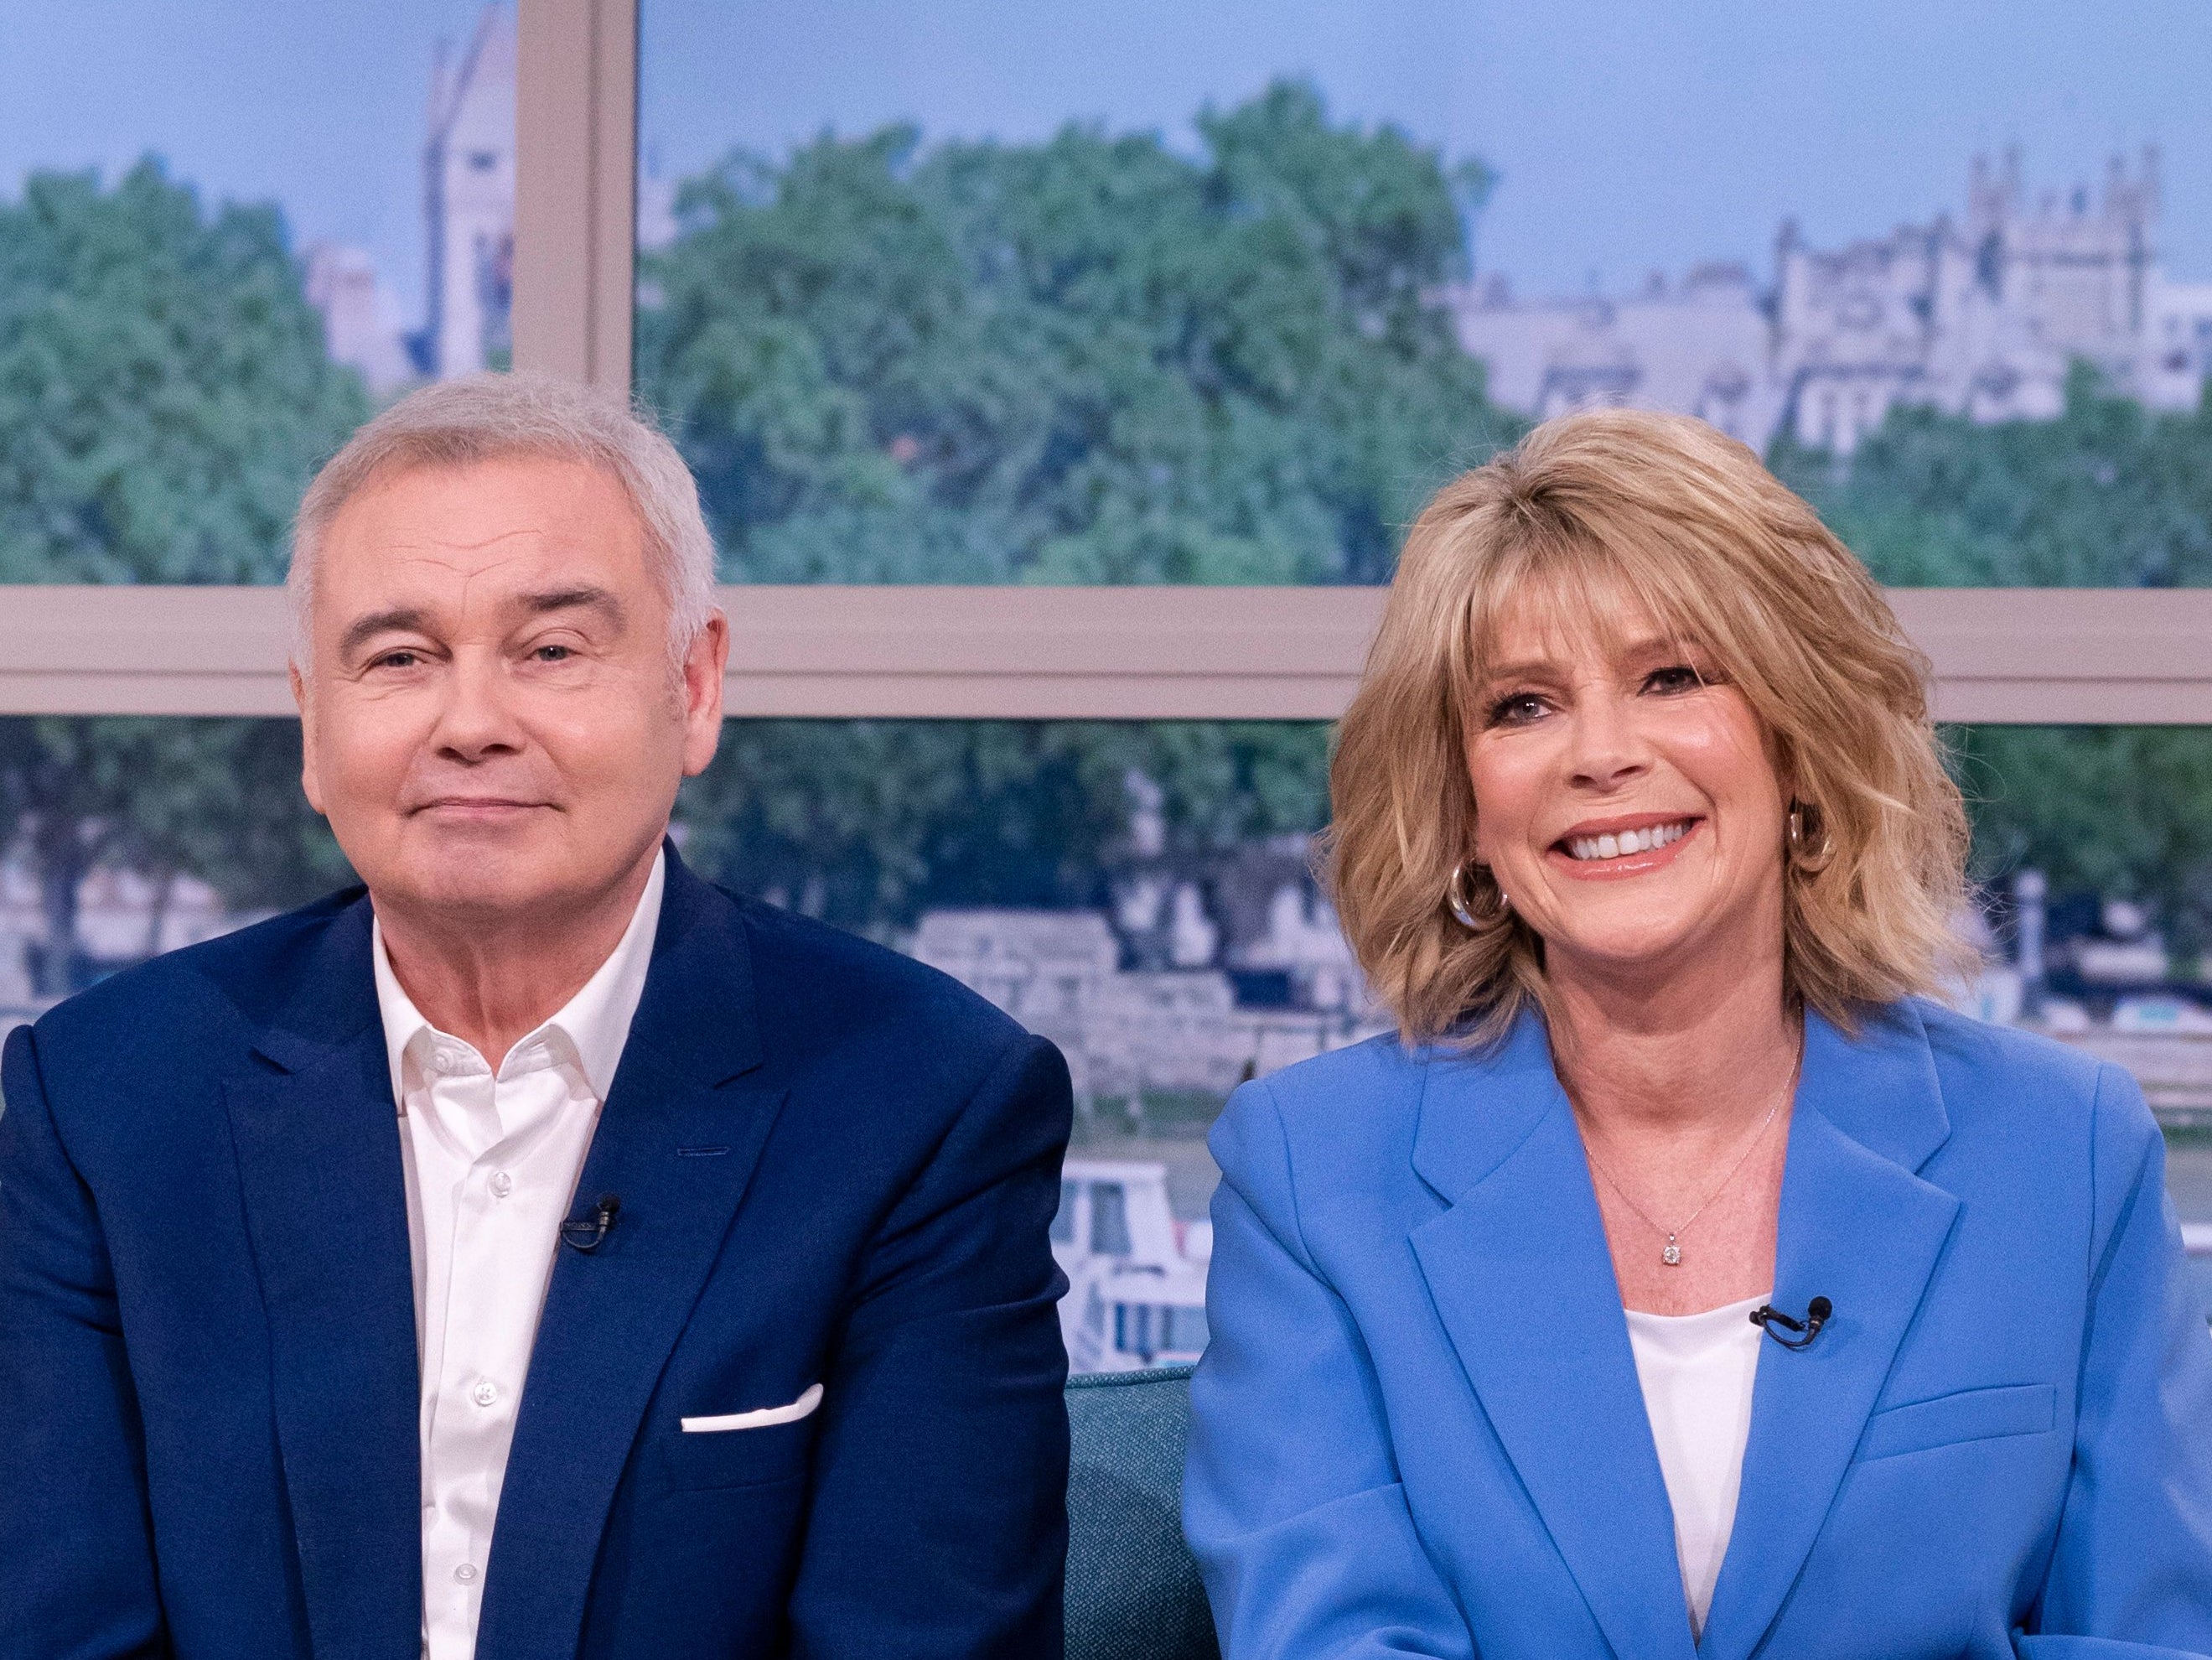 Eamonn Holmes and Ruth Langaford hosted ‘This Morning’ togetehr since 2006